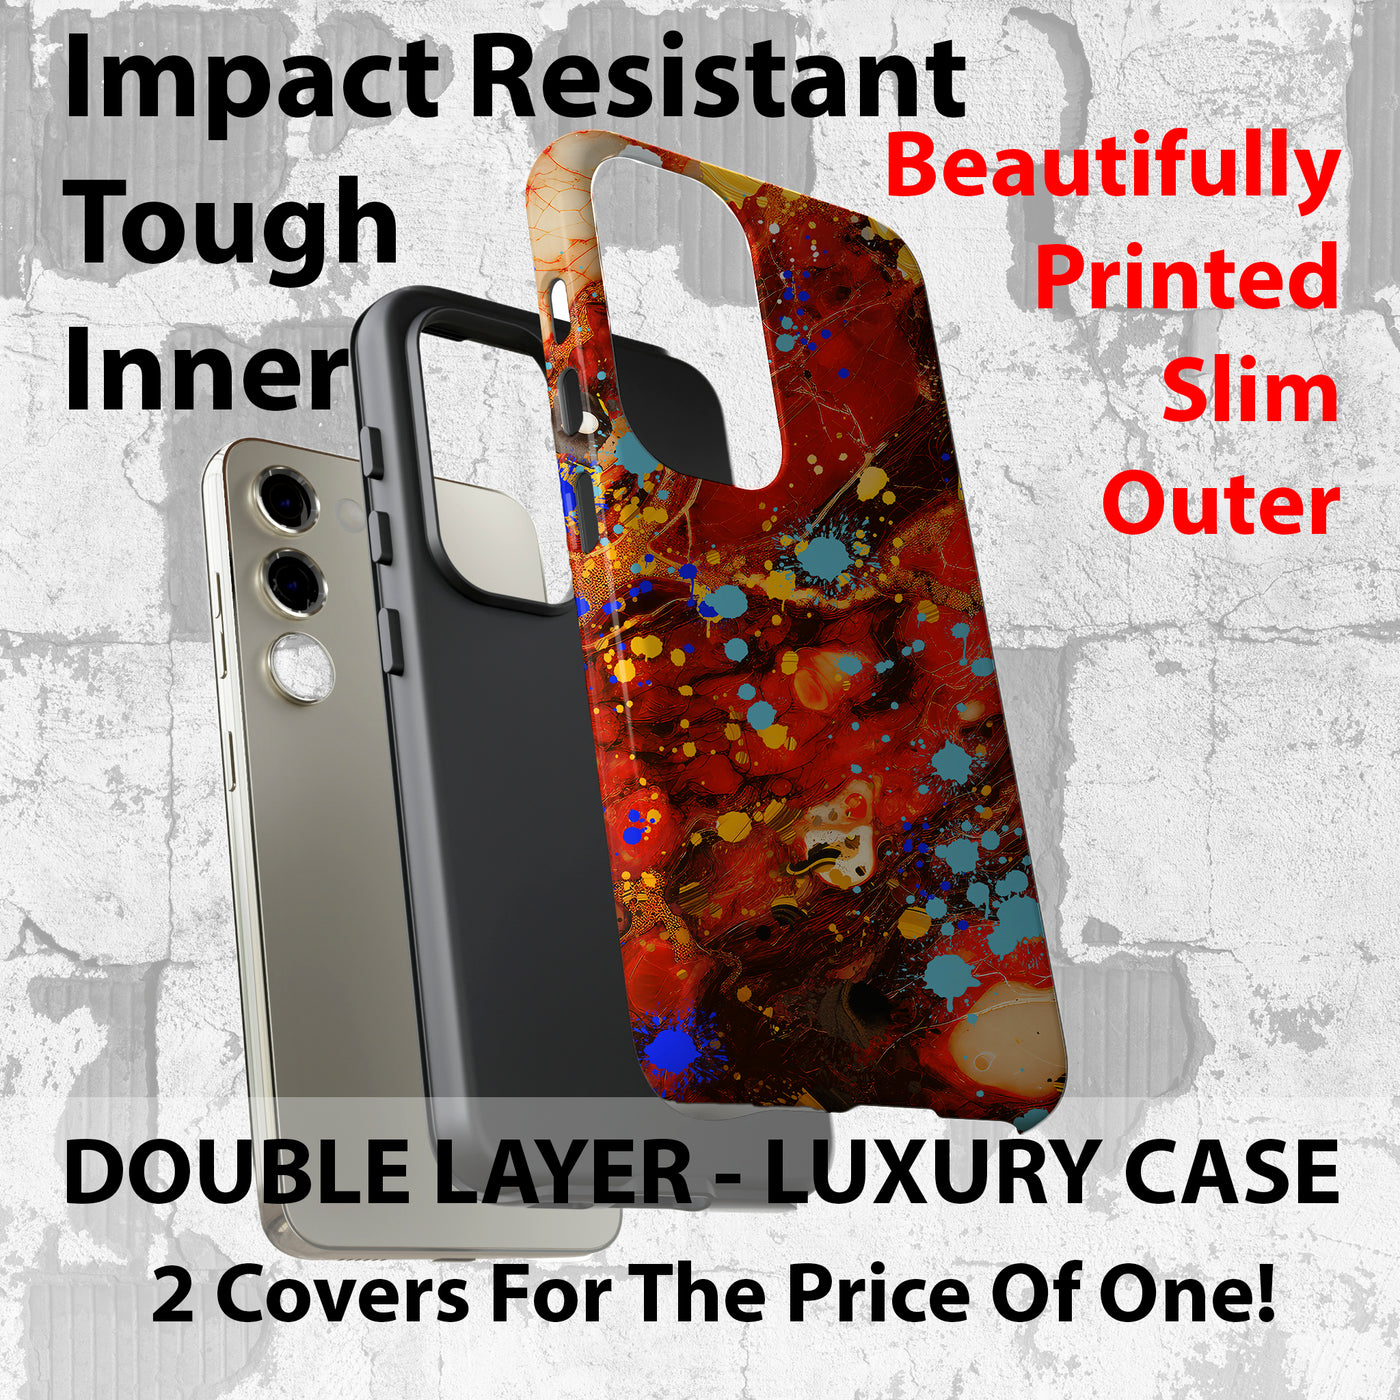 Samsung Galaxy Phone Case | Galaxy S23, S22, S21, S20 | Luxury Case Double Layered | Impact Resistant | Fashionable - Smile 2